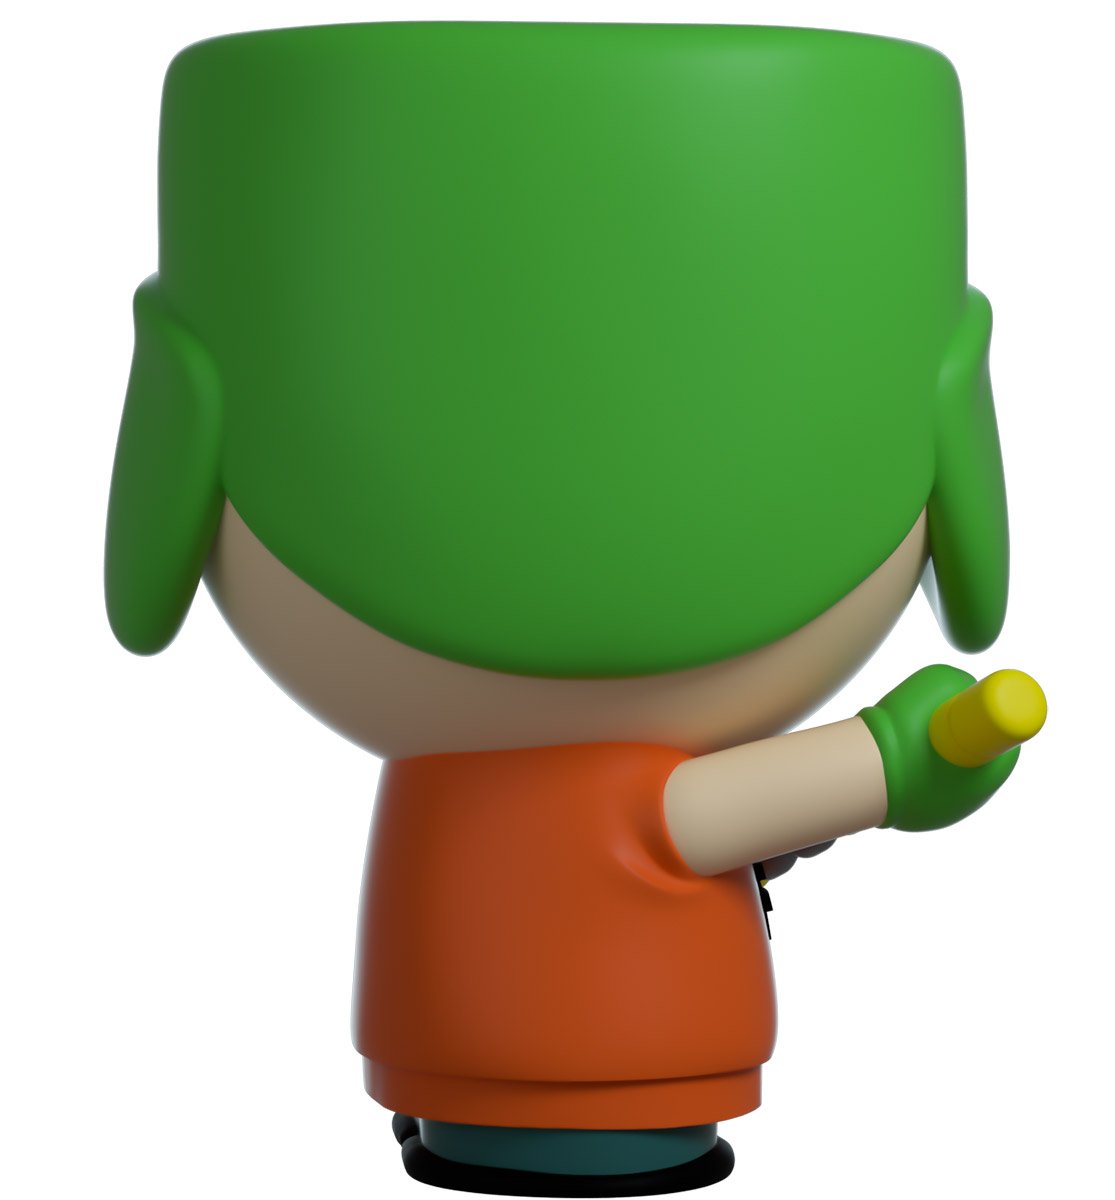 South Park: Good Times With Weapons Kyle YouTooz Vinyl Figure